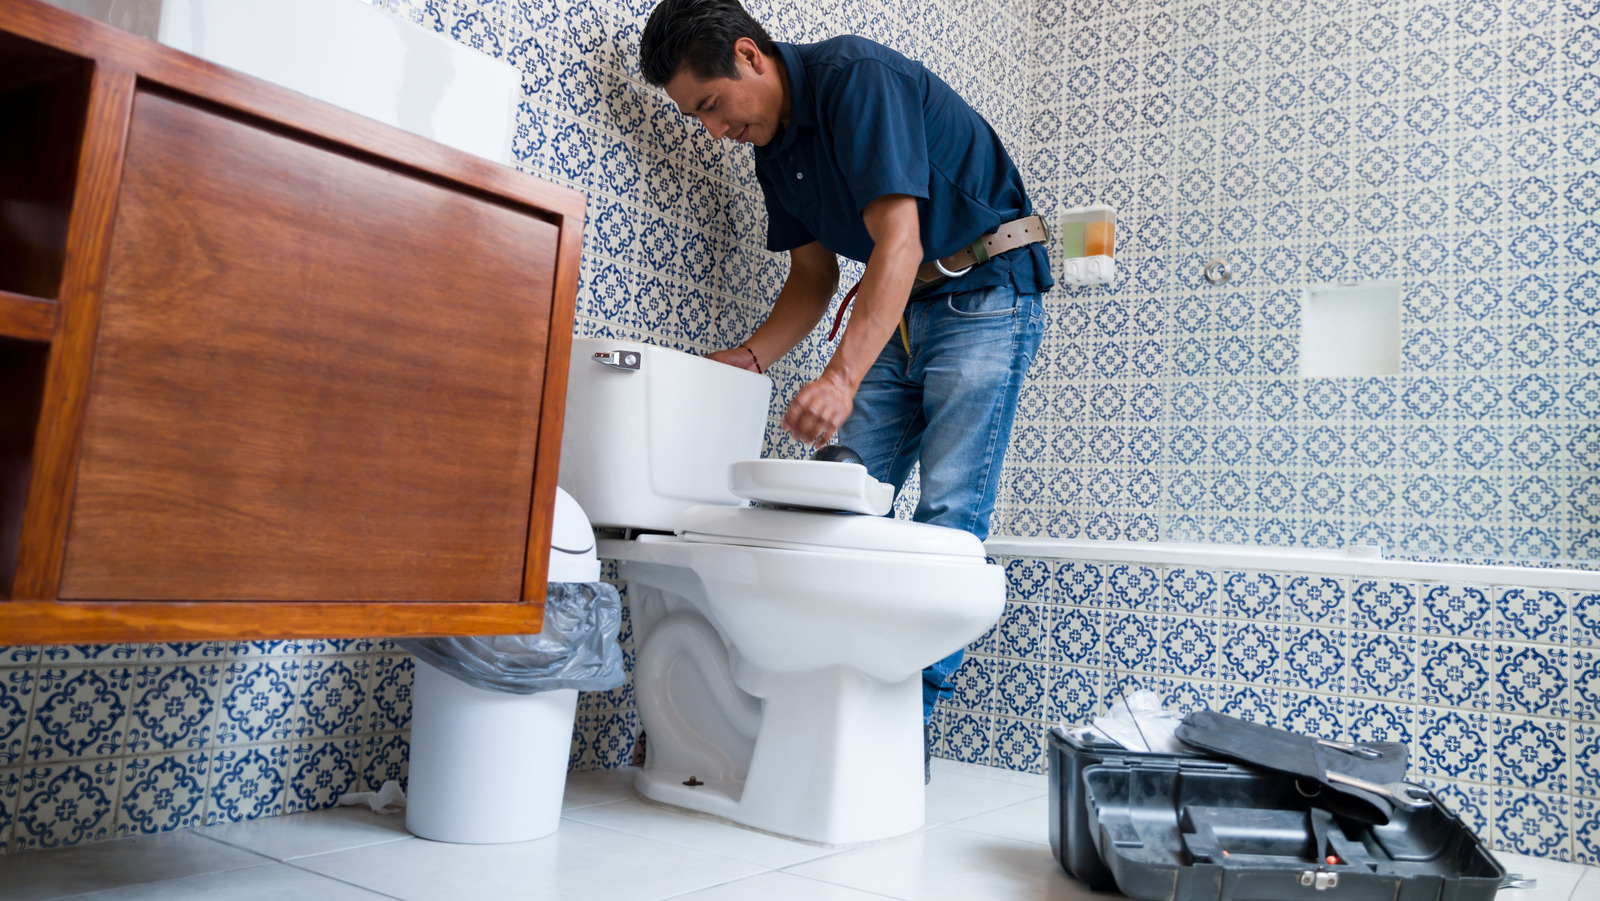 The Toilet Mistake You’ll Want To Avoid Making In The Bathroom